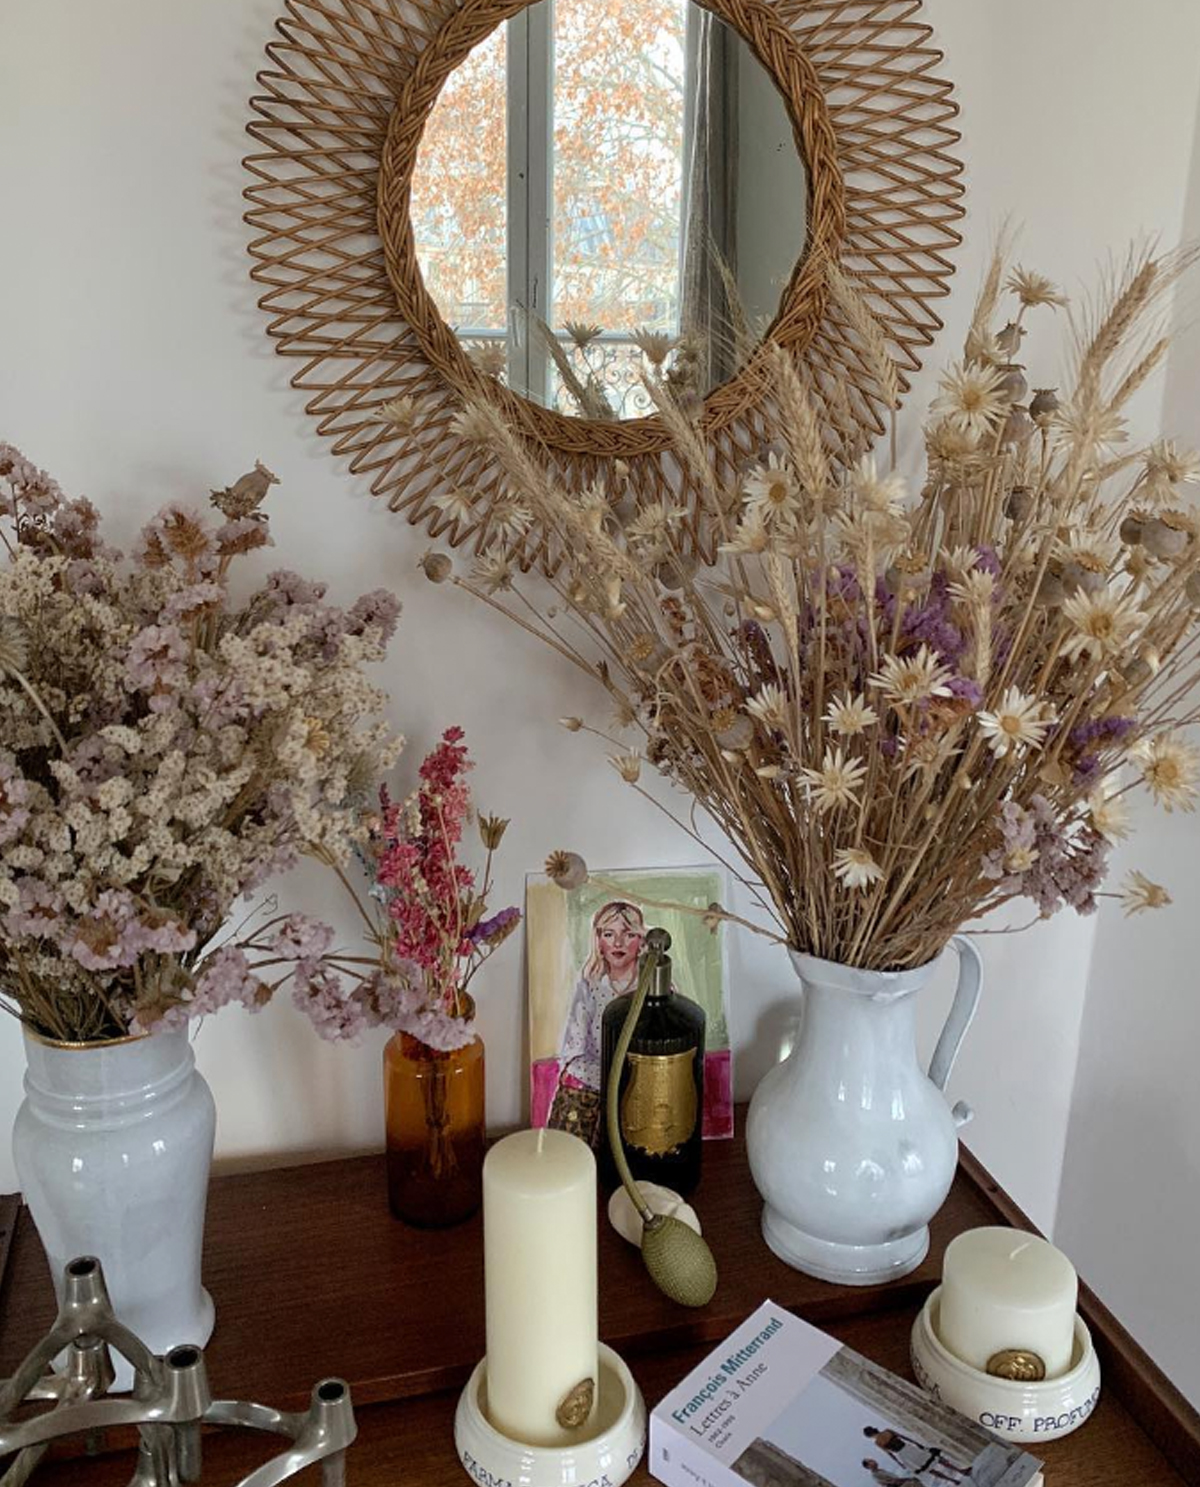 Dried flowers trend: